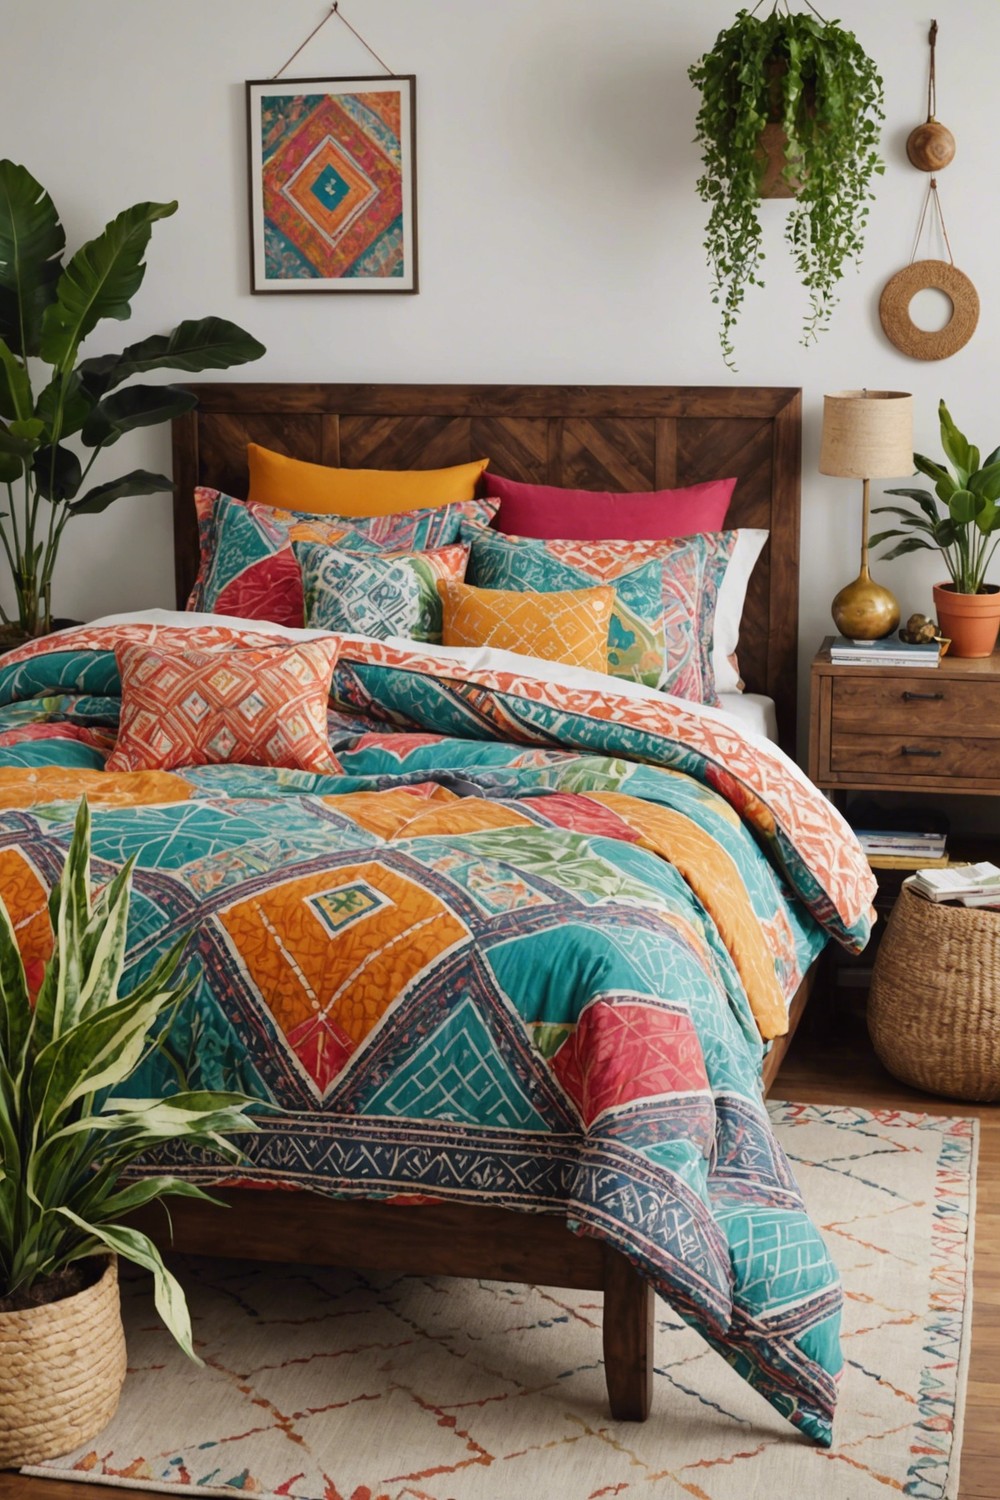 Mix-and-Match Patterned Bedding